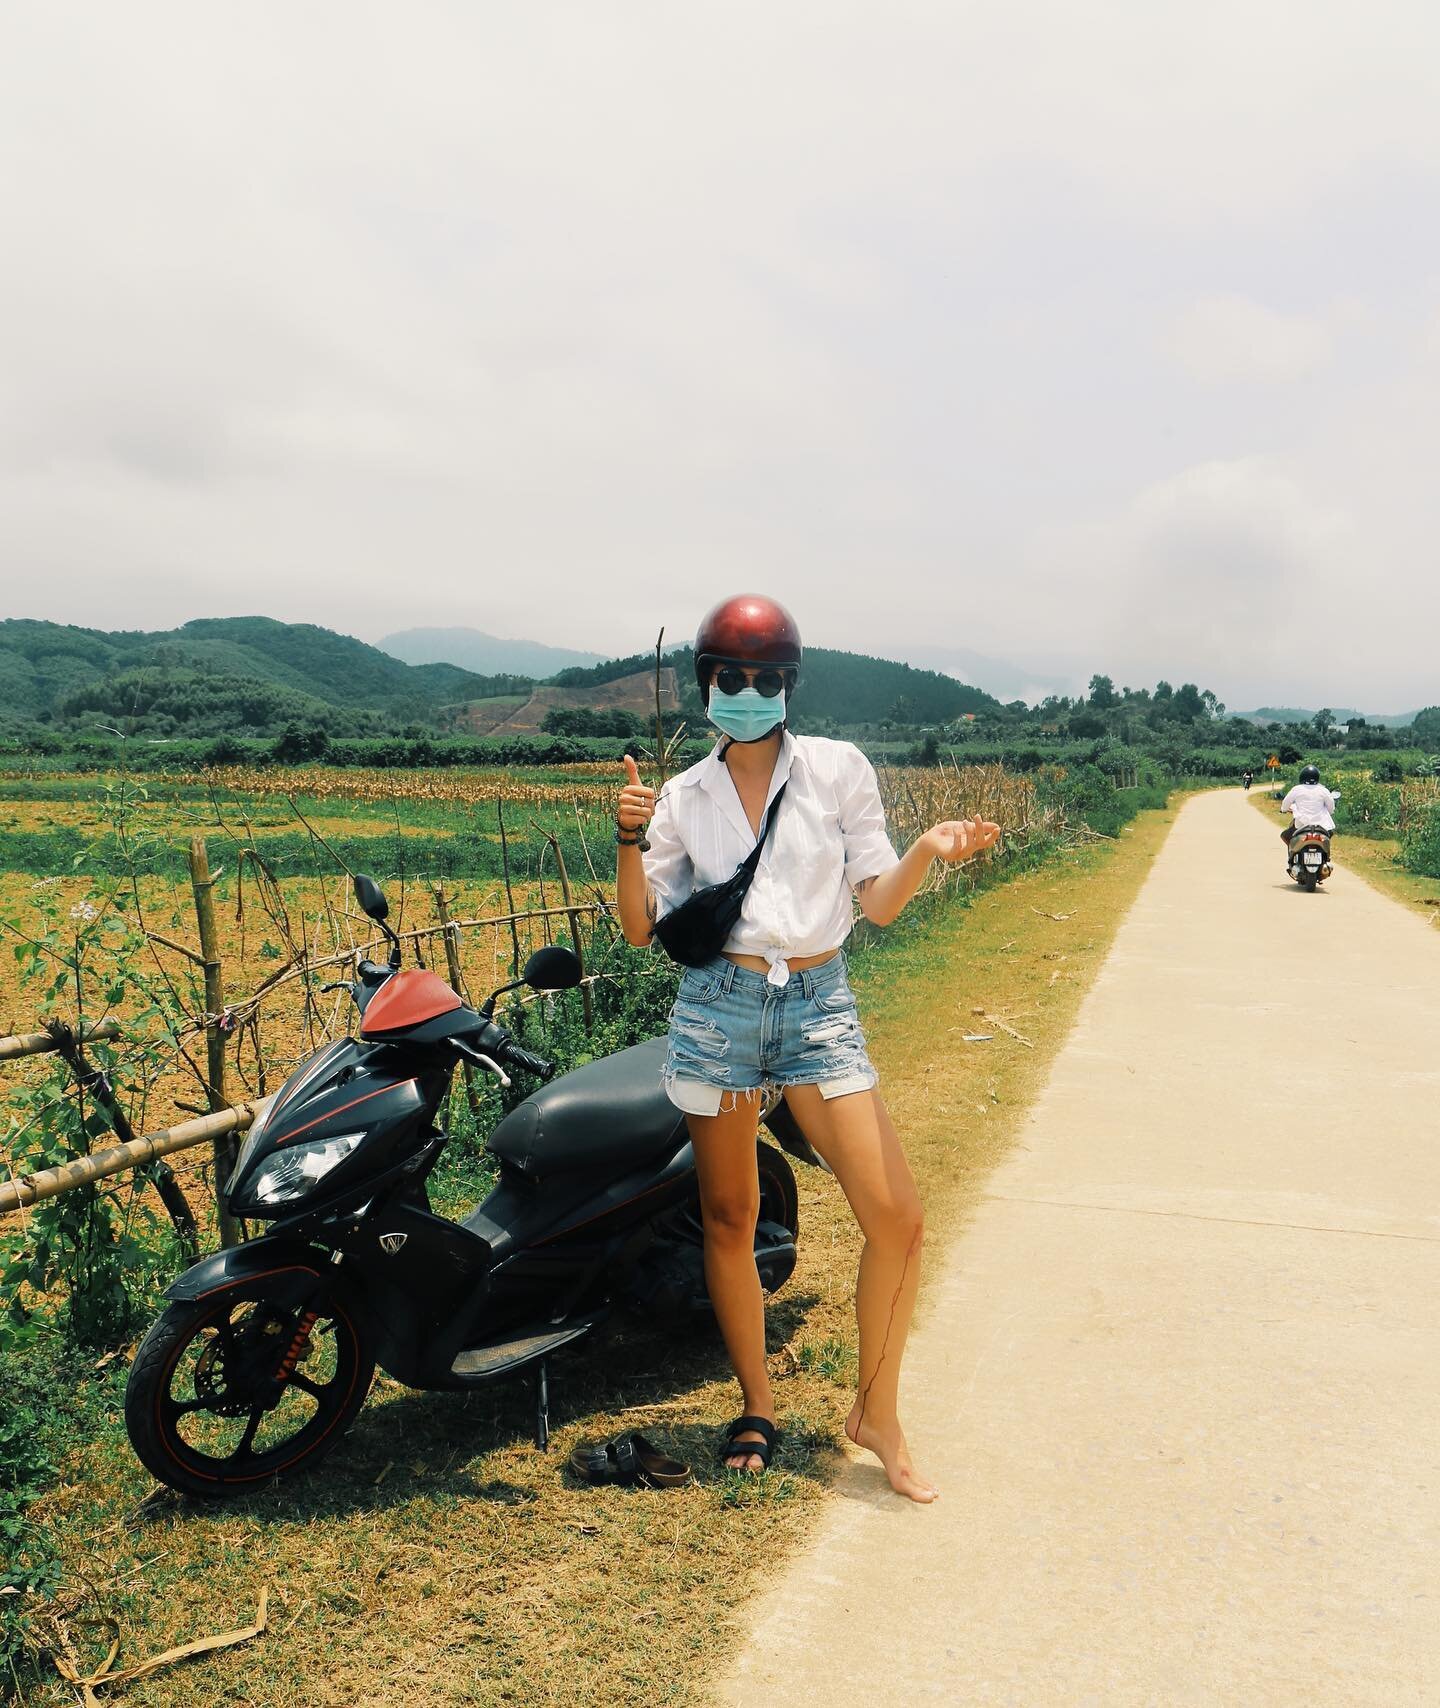 Turning 28 in Vietnam wasn&rsquo;t exactly my plan, but neither was crashing my moped on this tiny path in Phong Nha. 🏞
Still, leaving some blood on the side of the road seems only fitting. I&rsquo;ve been here nearly two months, with no sign of whe